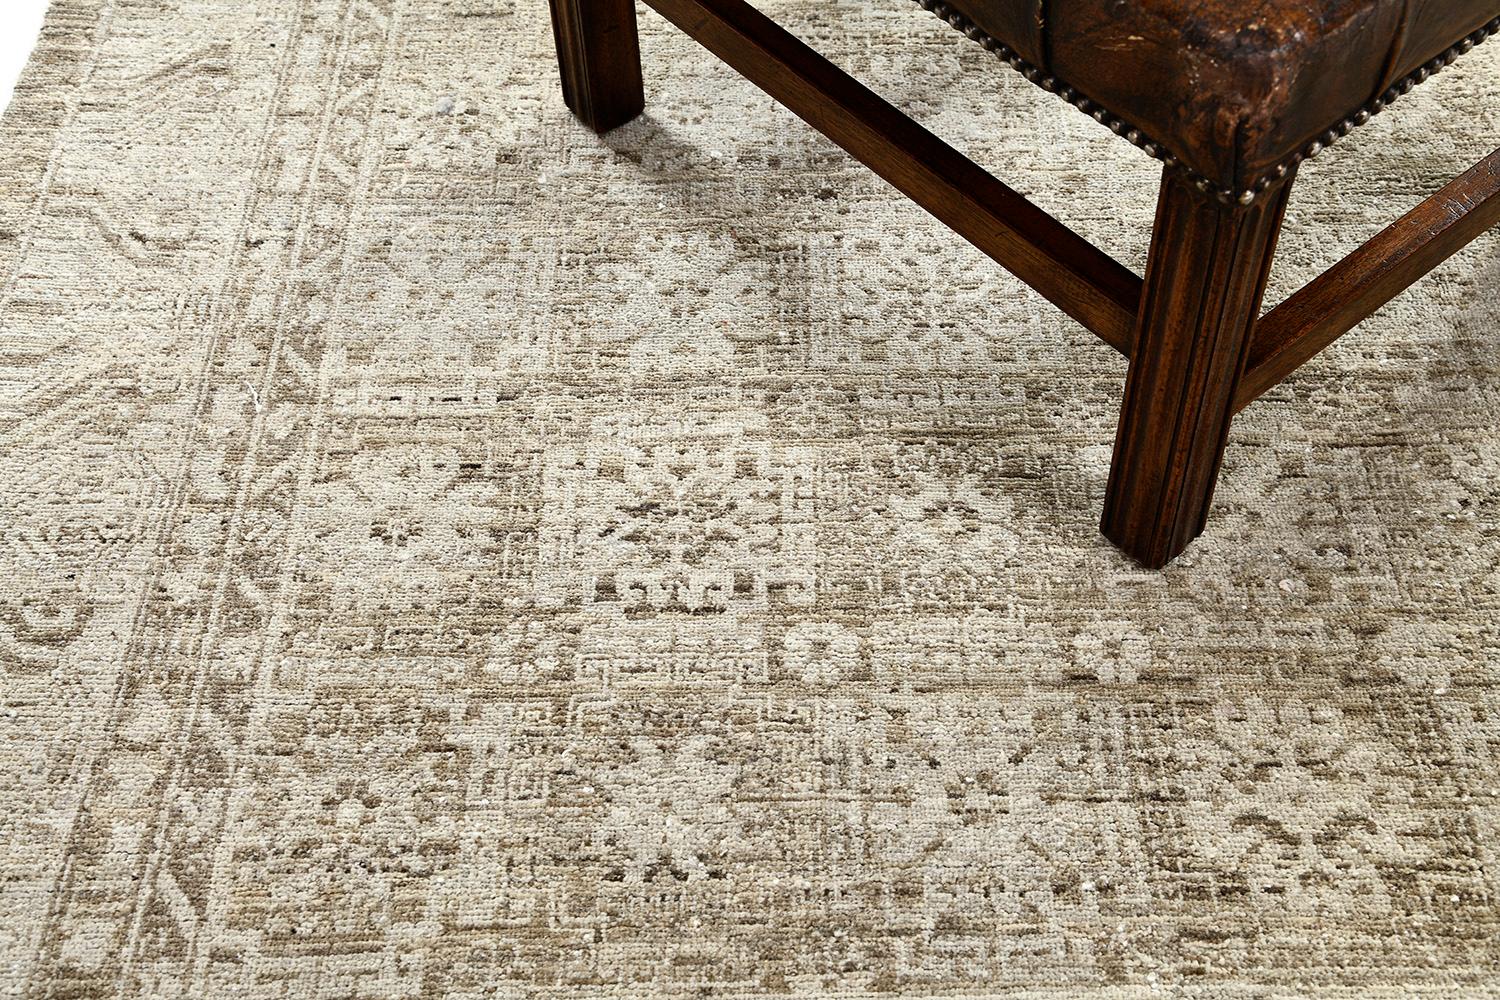 A meticulous revival of a Khotan Design Rug, ideally suited for a floor wall piece. An all-over design in camel-toned outlines is aligned in a muted panel vegetable dye. From borders to the field, it compliments every single detail to achieve a